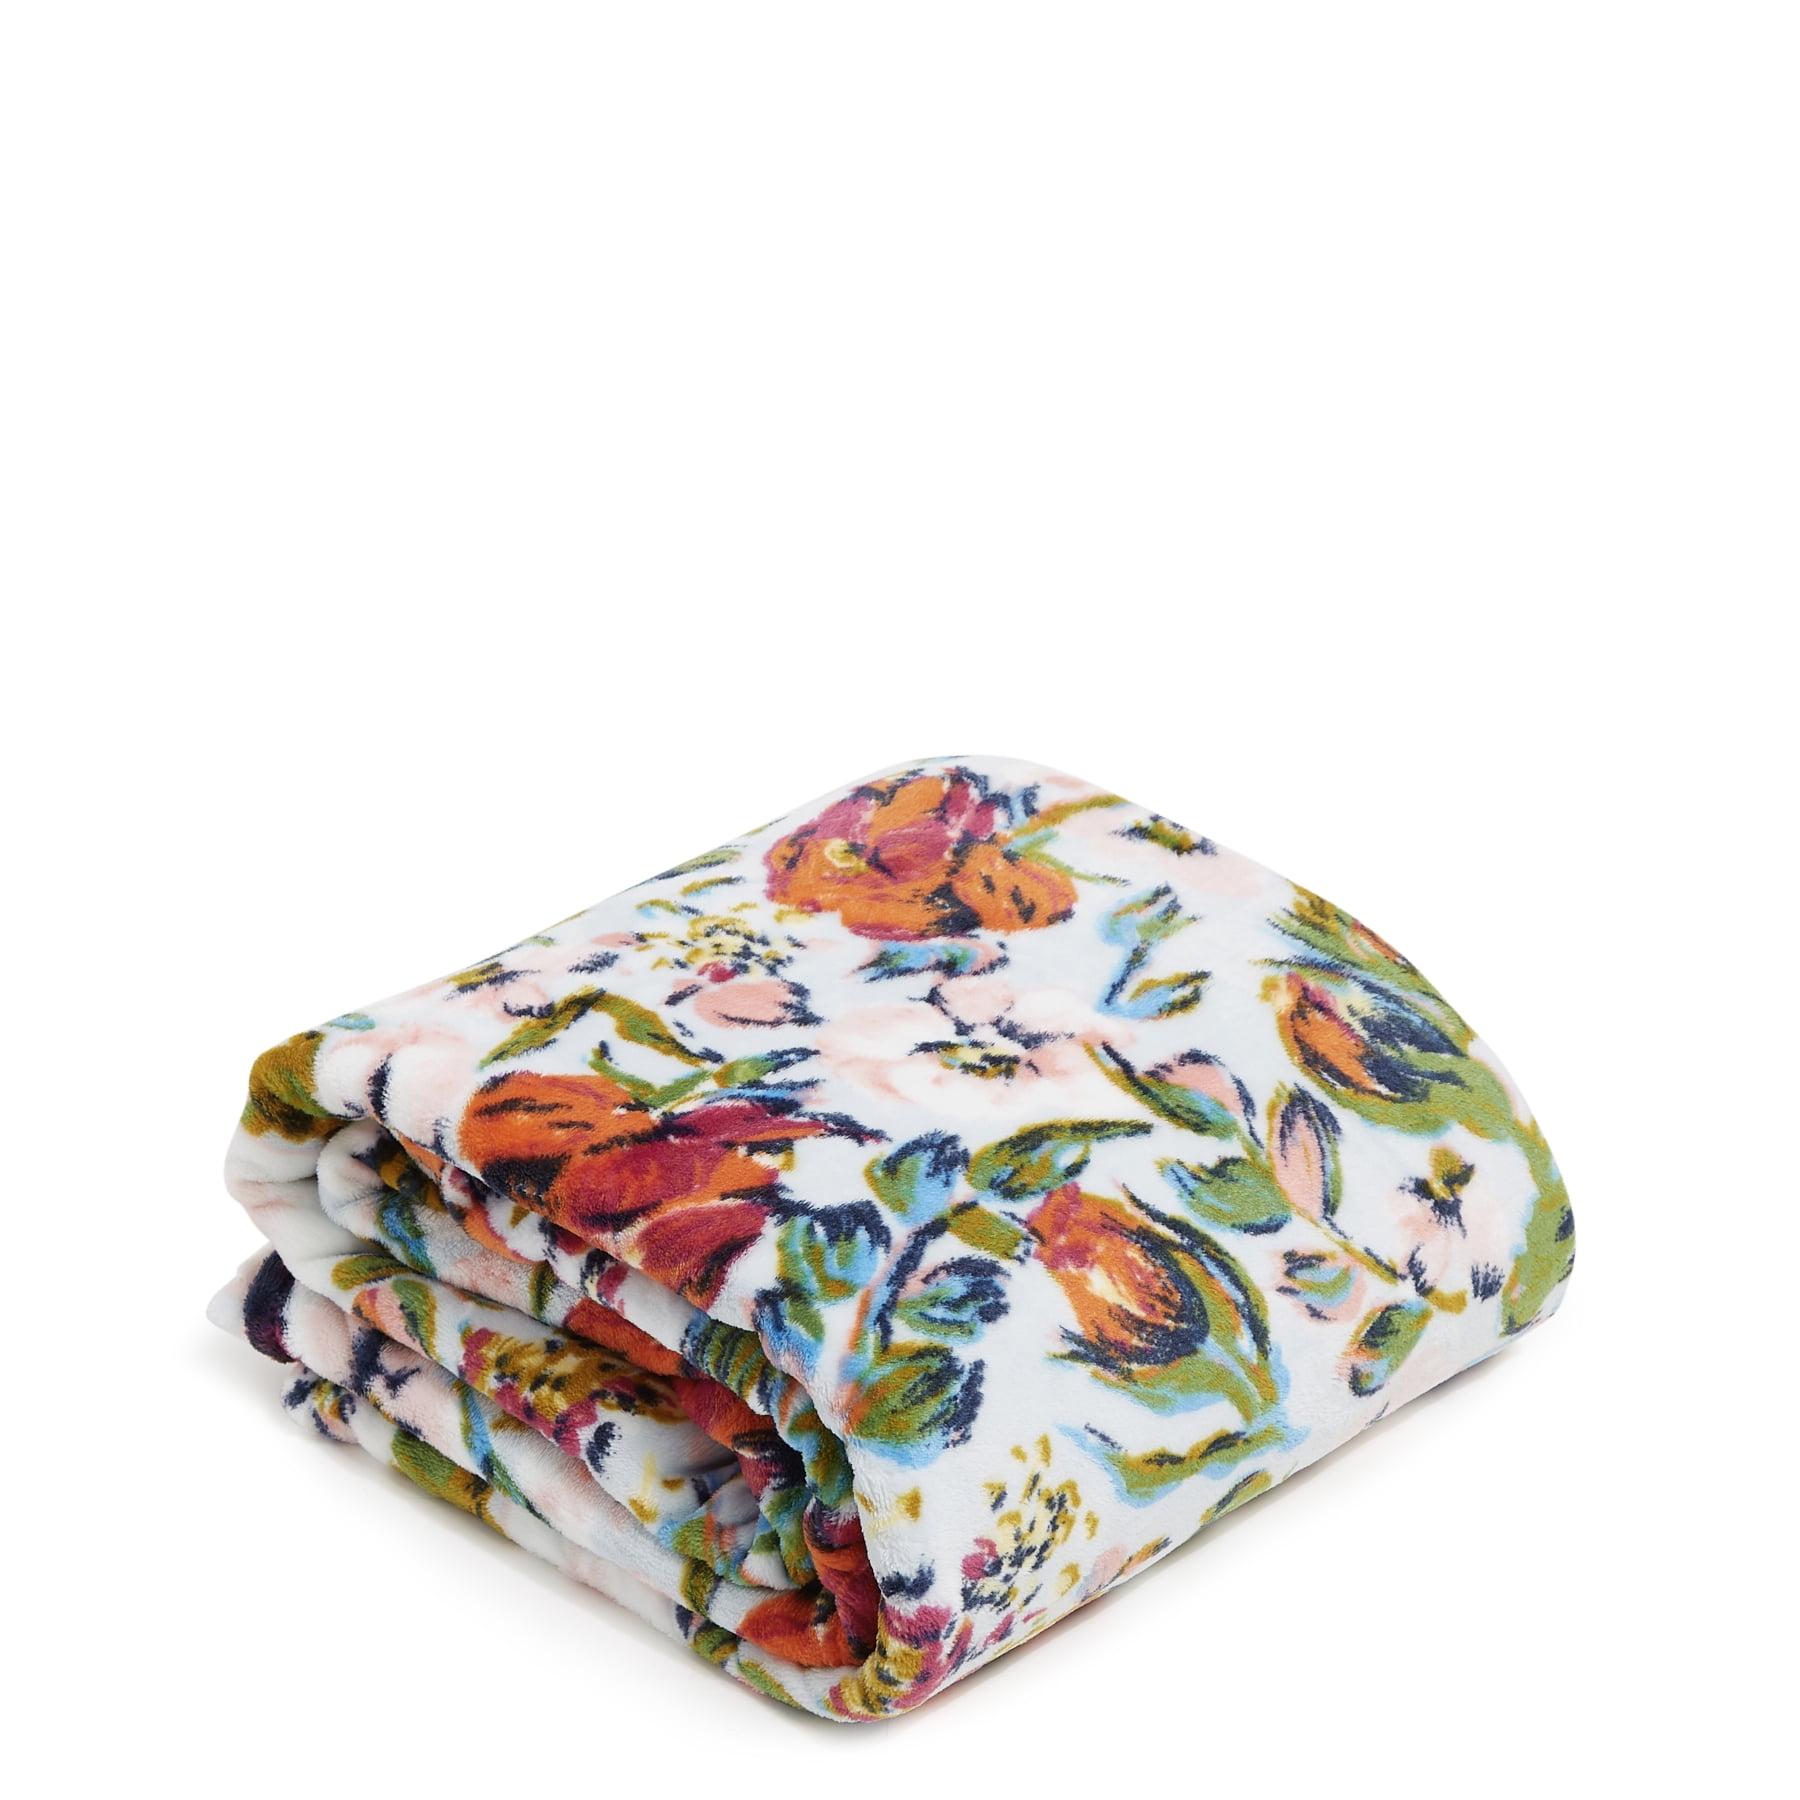 Sea Air Floral Fleece Weighted 50" x 80" Throw Blanket